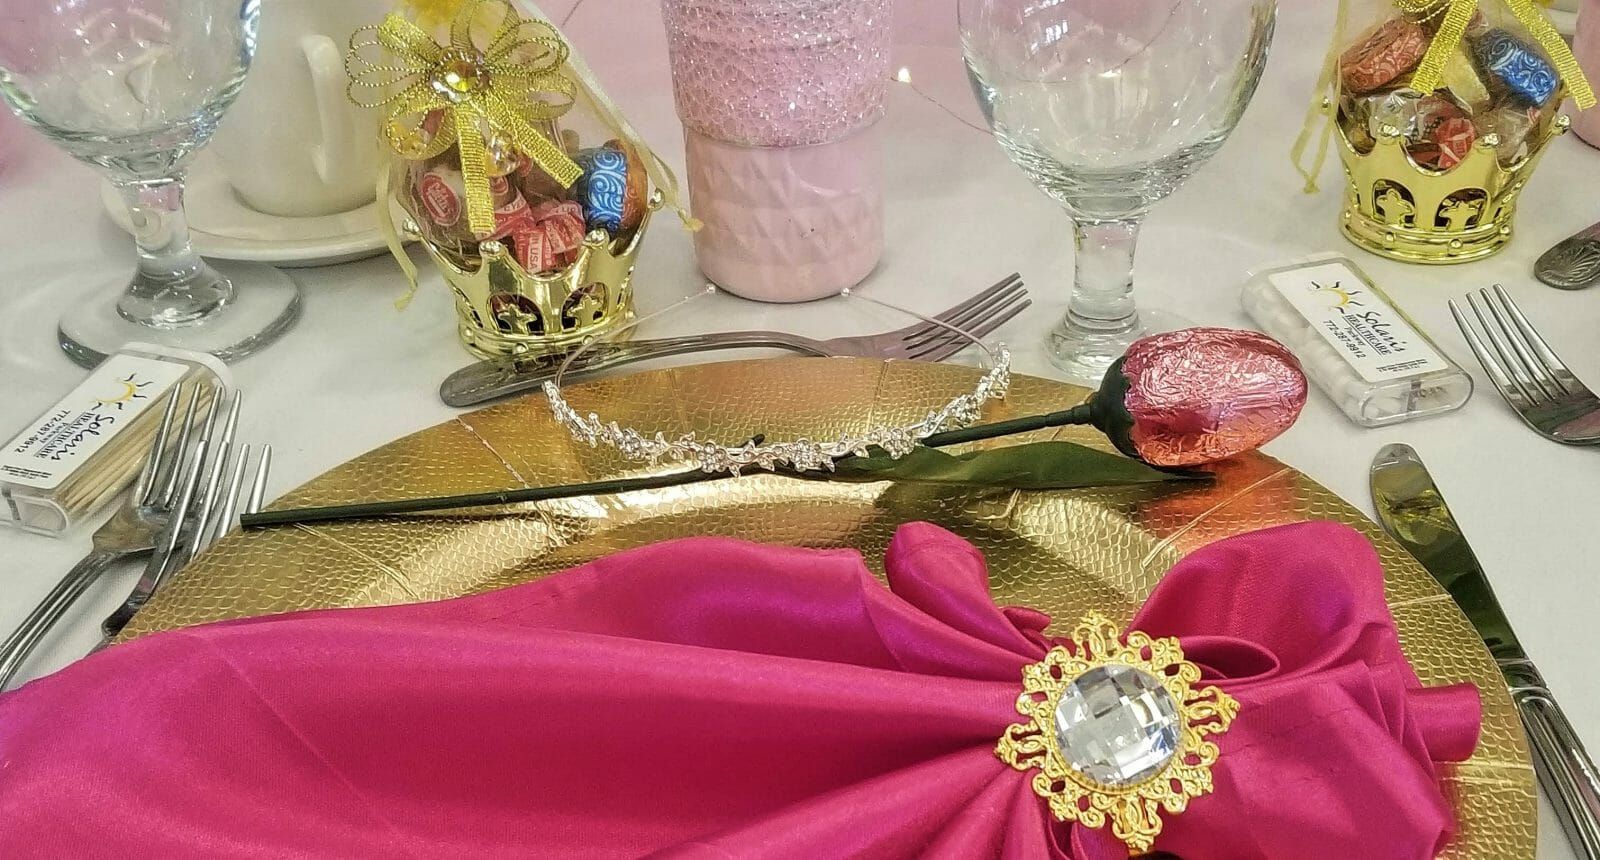 Table setting with pink napkin over gold plate